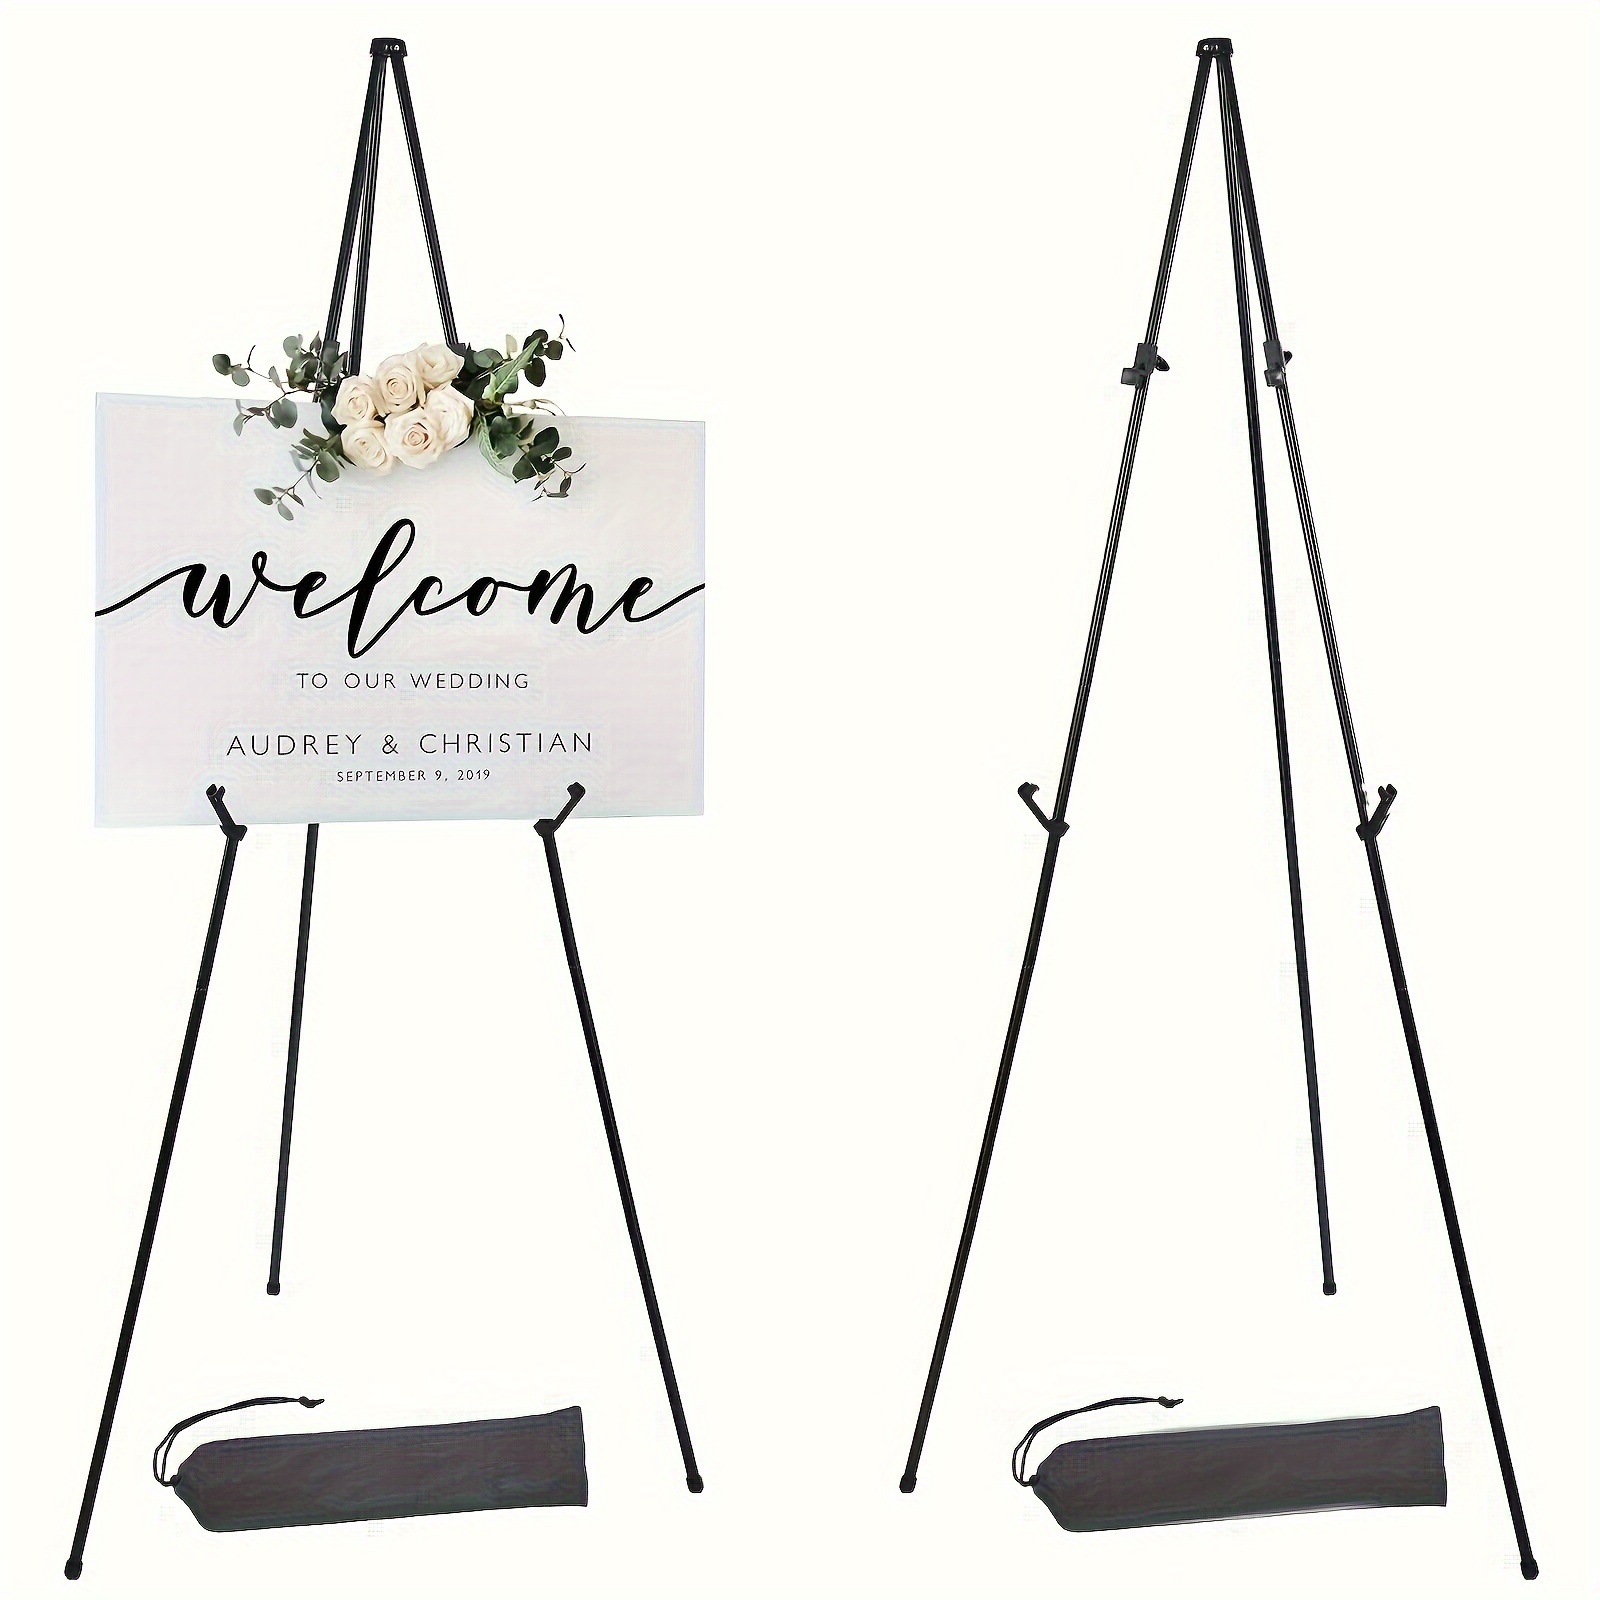 

Adjustable 63" Black Metal Easel Stand - Portable Folding Display For Art, Posters & Wedding Signs With Carry Bag